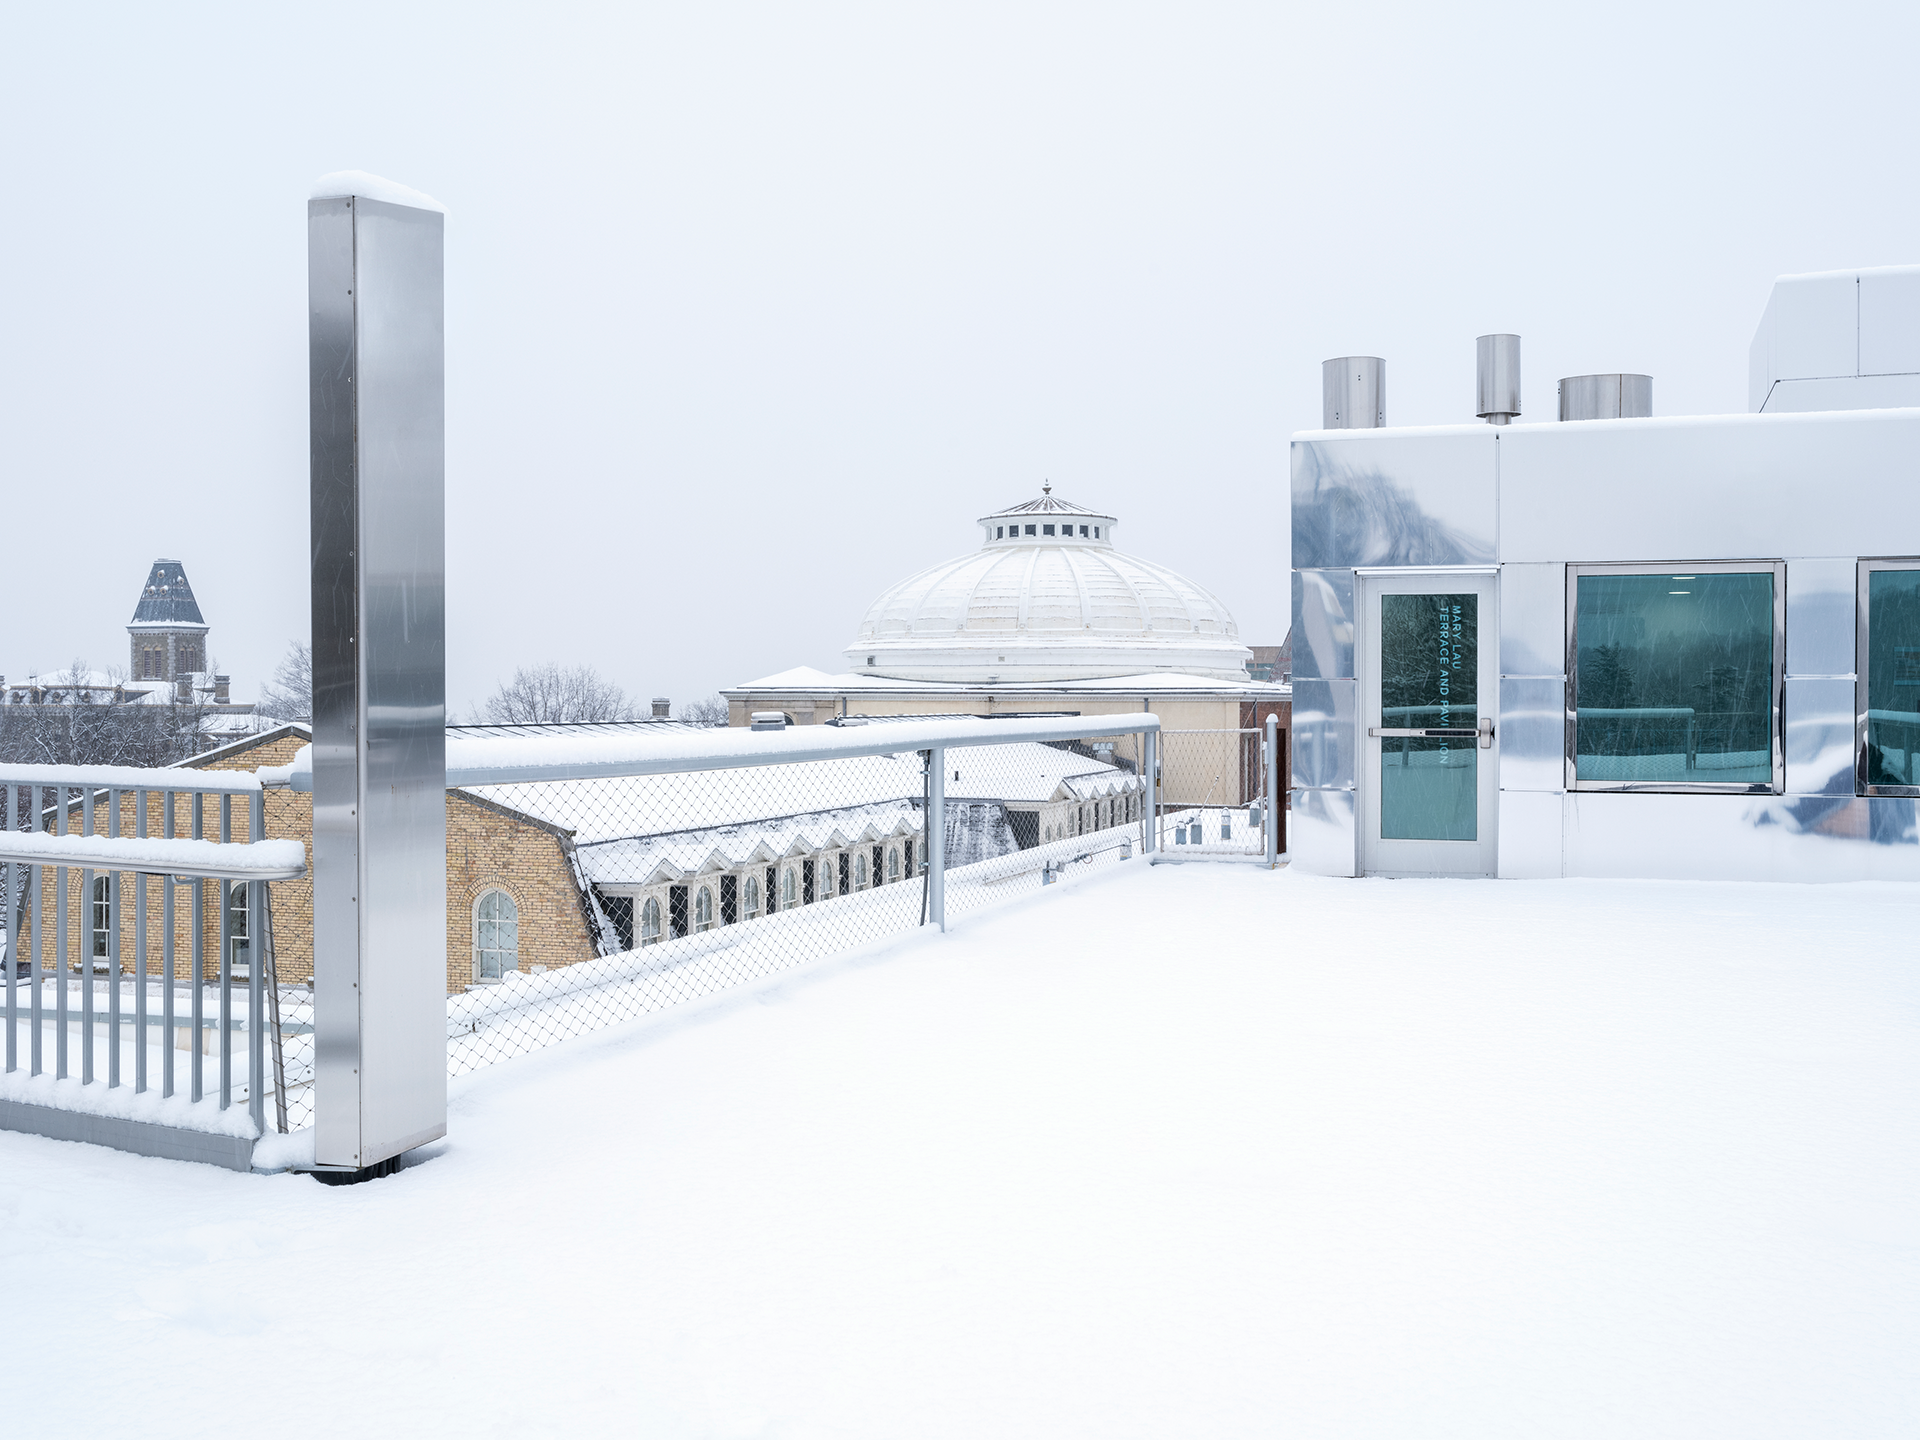 View across campus from a snow-covered rooftop.